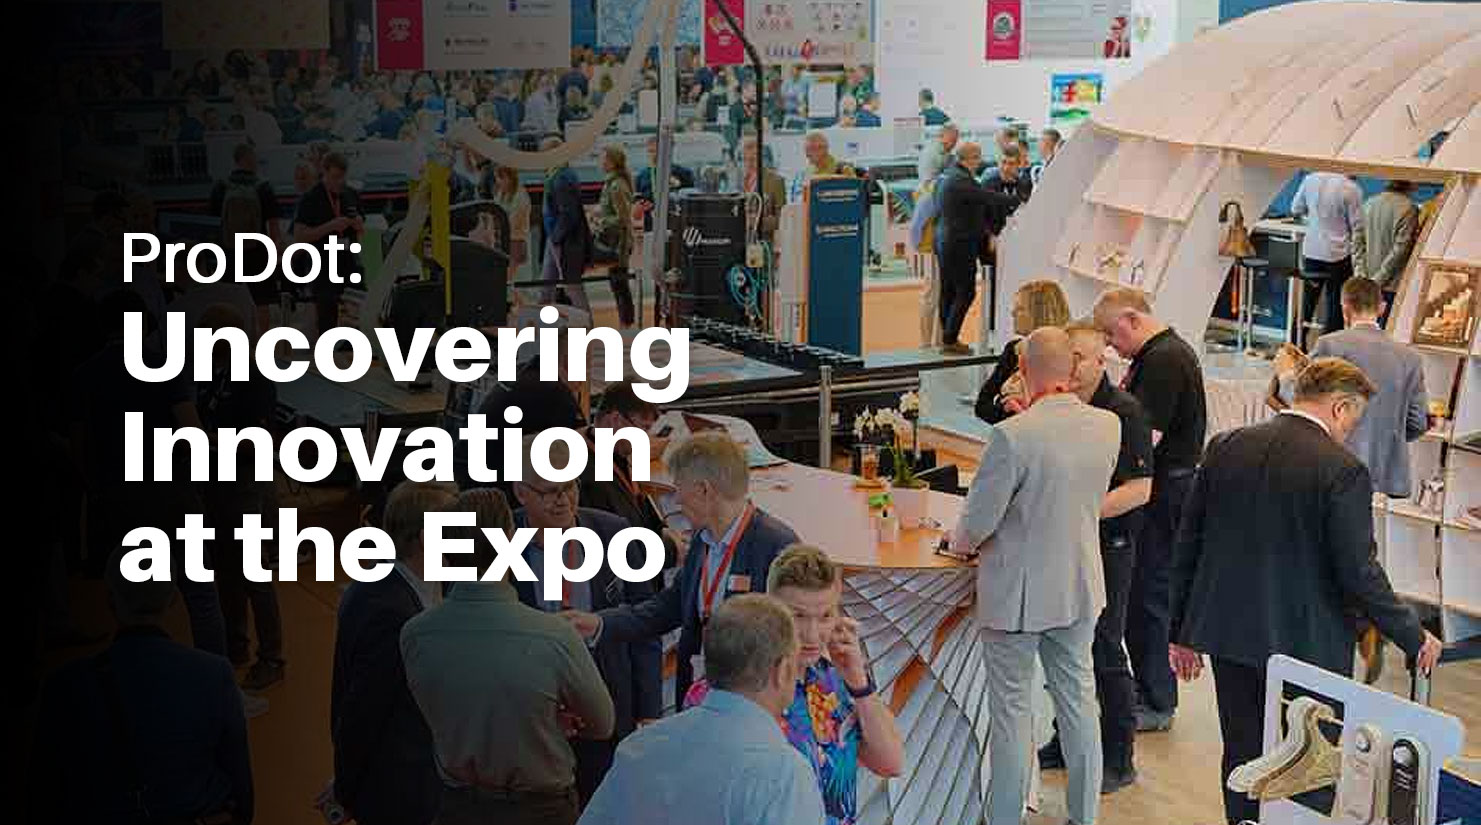 prodot group: uncovering innovation at the expo